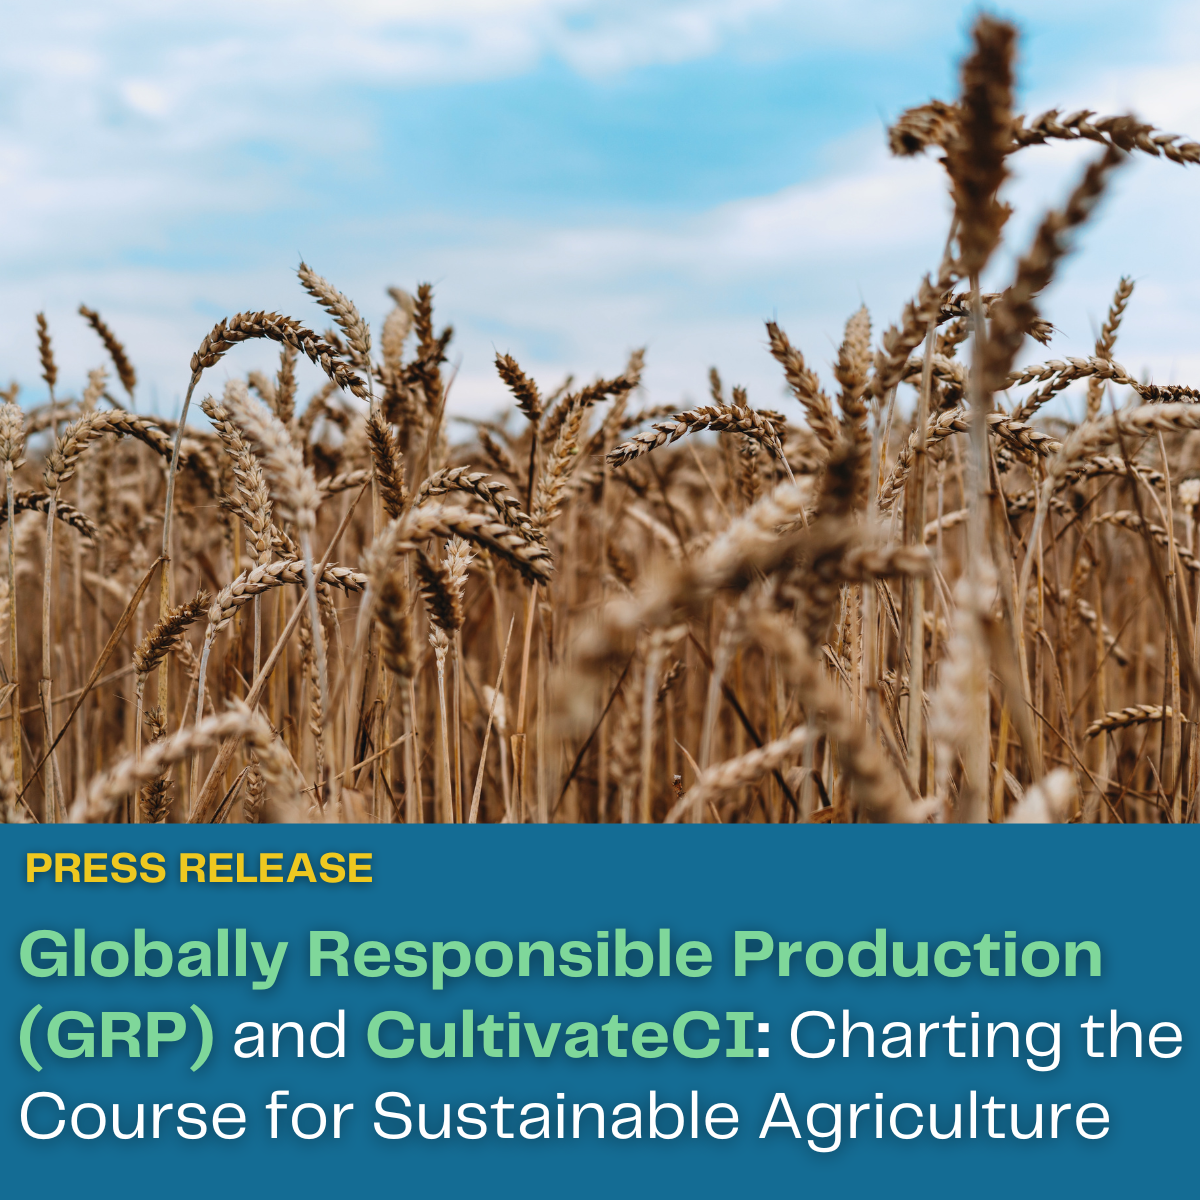 FOR IMMEDIATE RELEASE—Globally Responsible Production (GRP) and CultivateCI: Charting the Course for Sustainable Agriculture